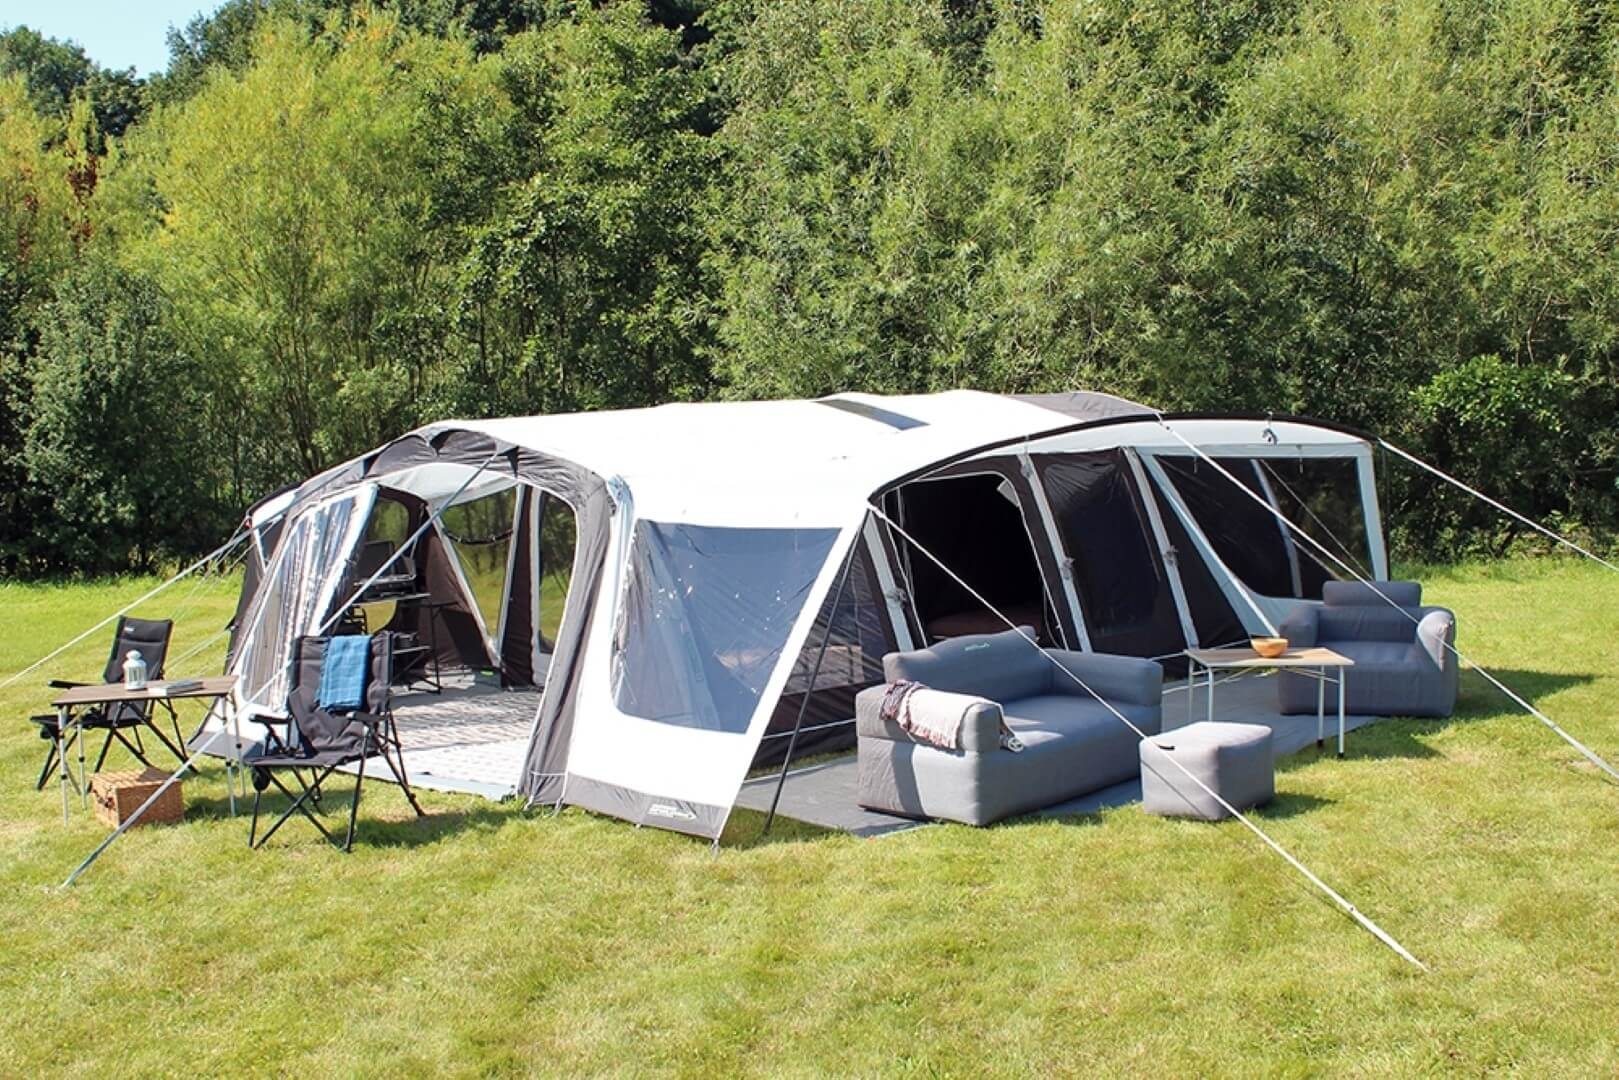 SIDE SUN WING SHADE FOR THE O-ZONE 8.0 SAFARI LODGE – Outdoor Revolution – Campers & Leisure